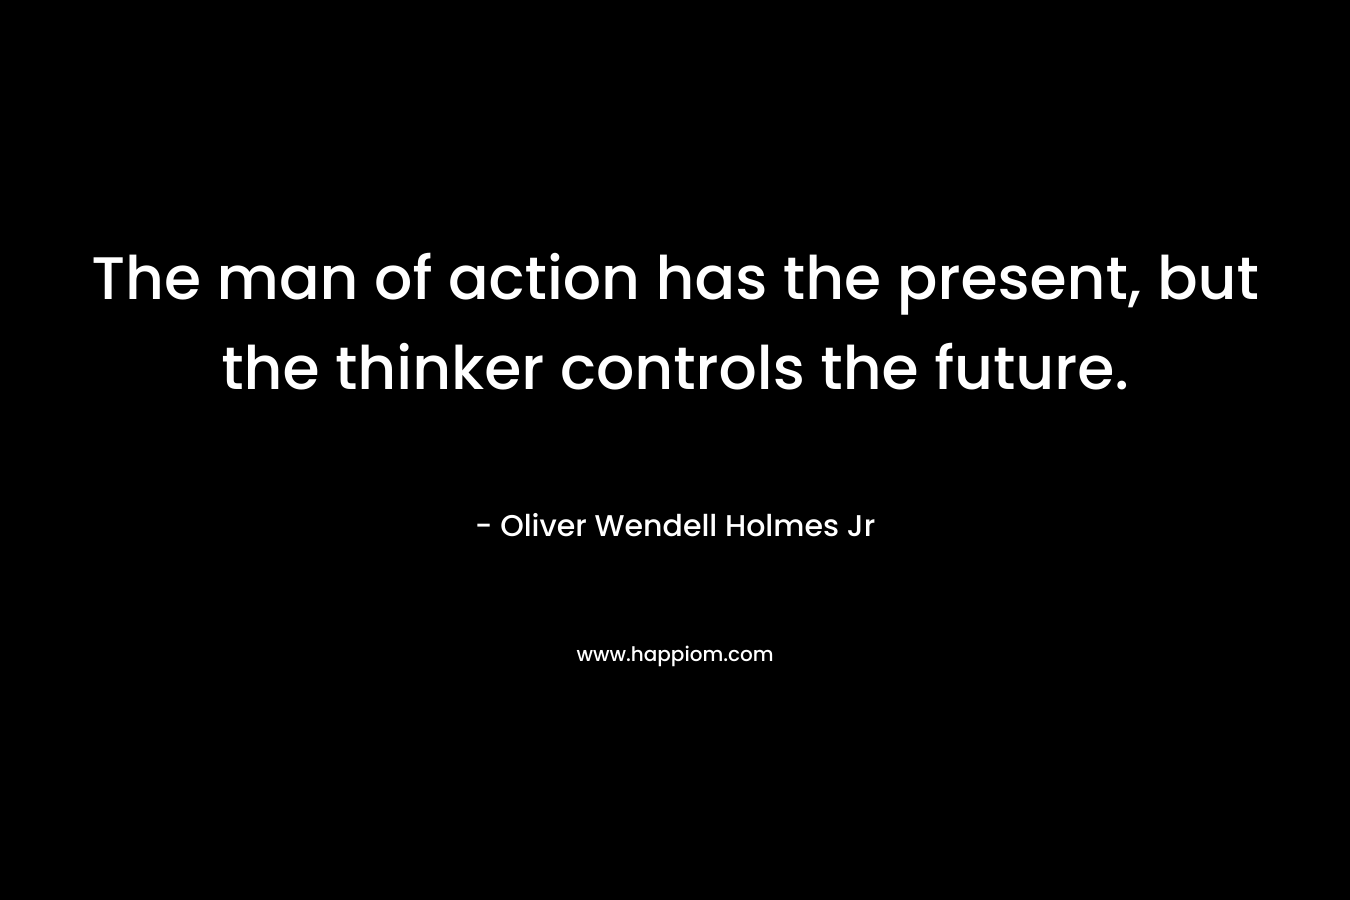 The man of action has the present, but the thinker controls the future. – Oliver Wendell Holmes Jr